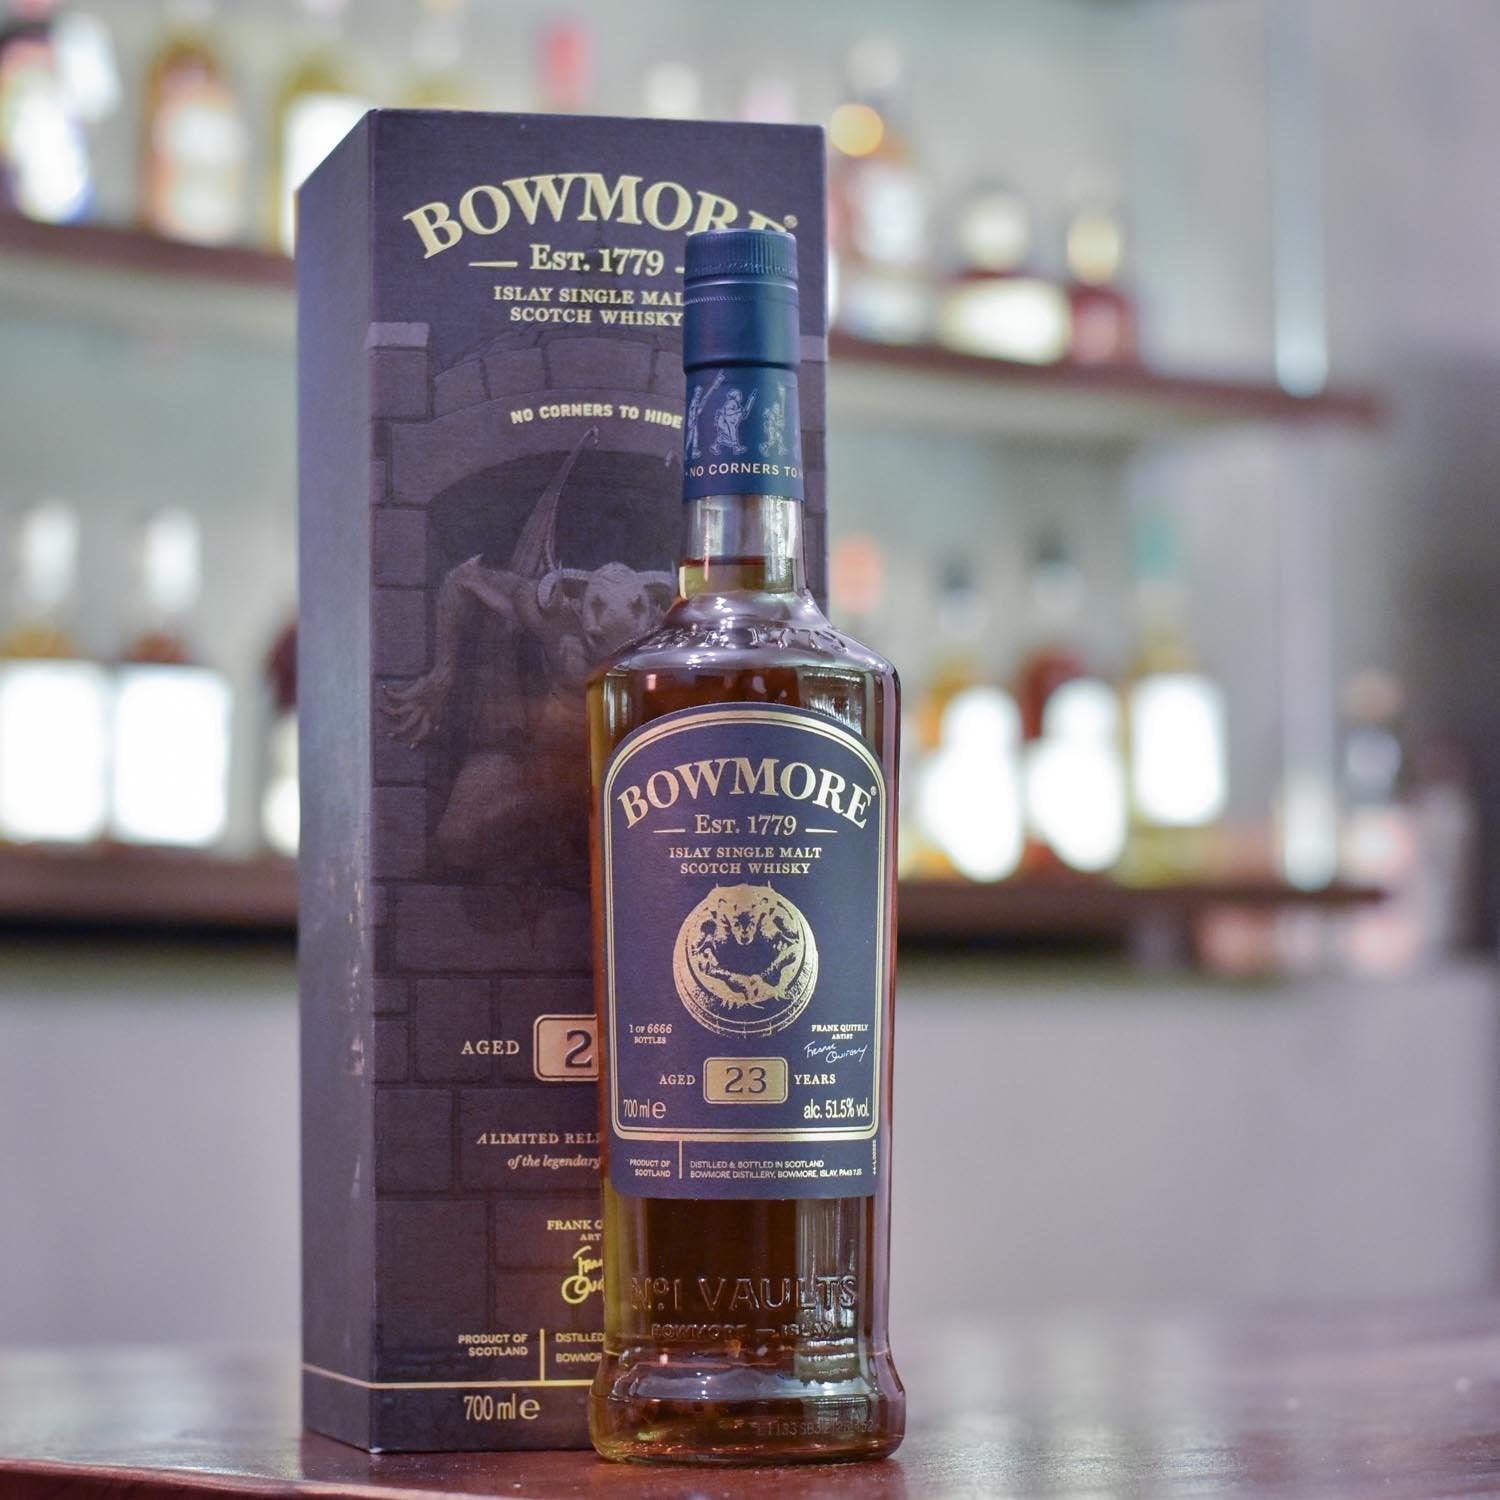 Bowmore 23 Year Old No Corners To Hide - The Rare Malt